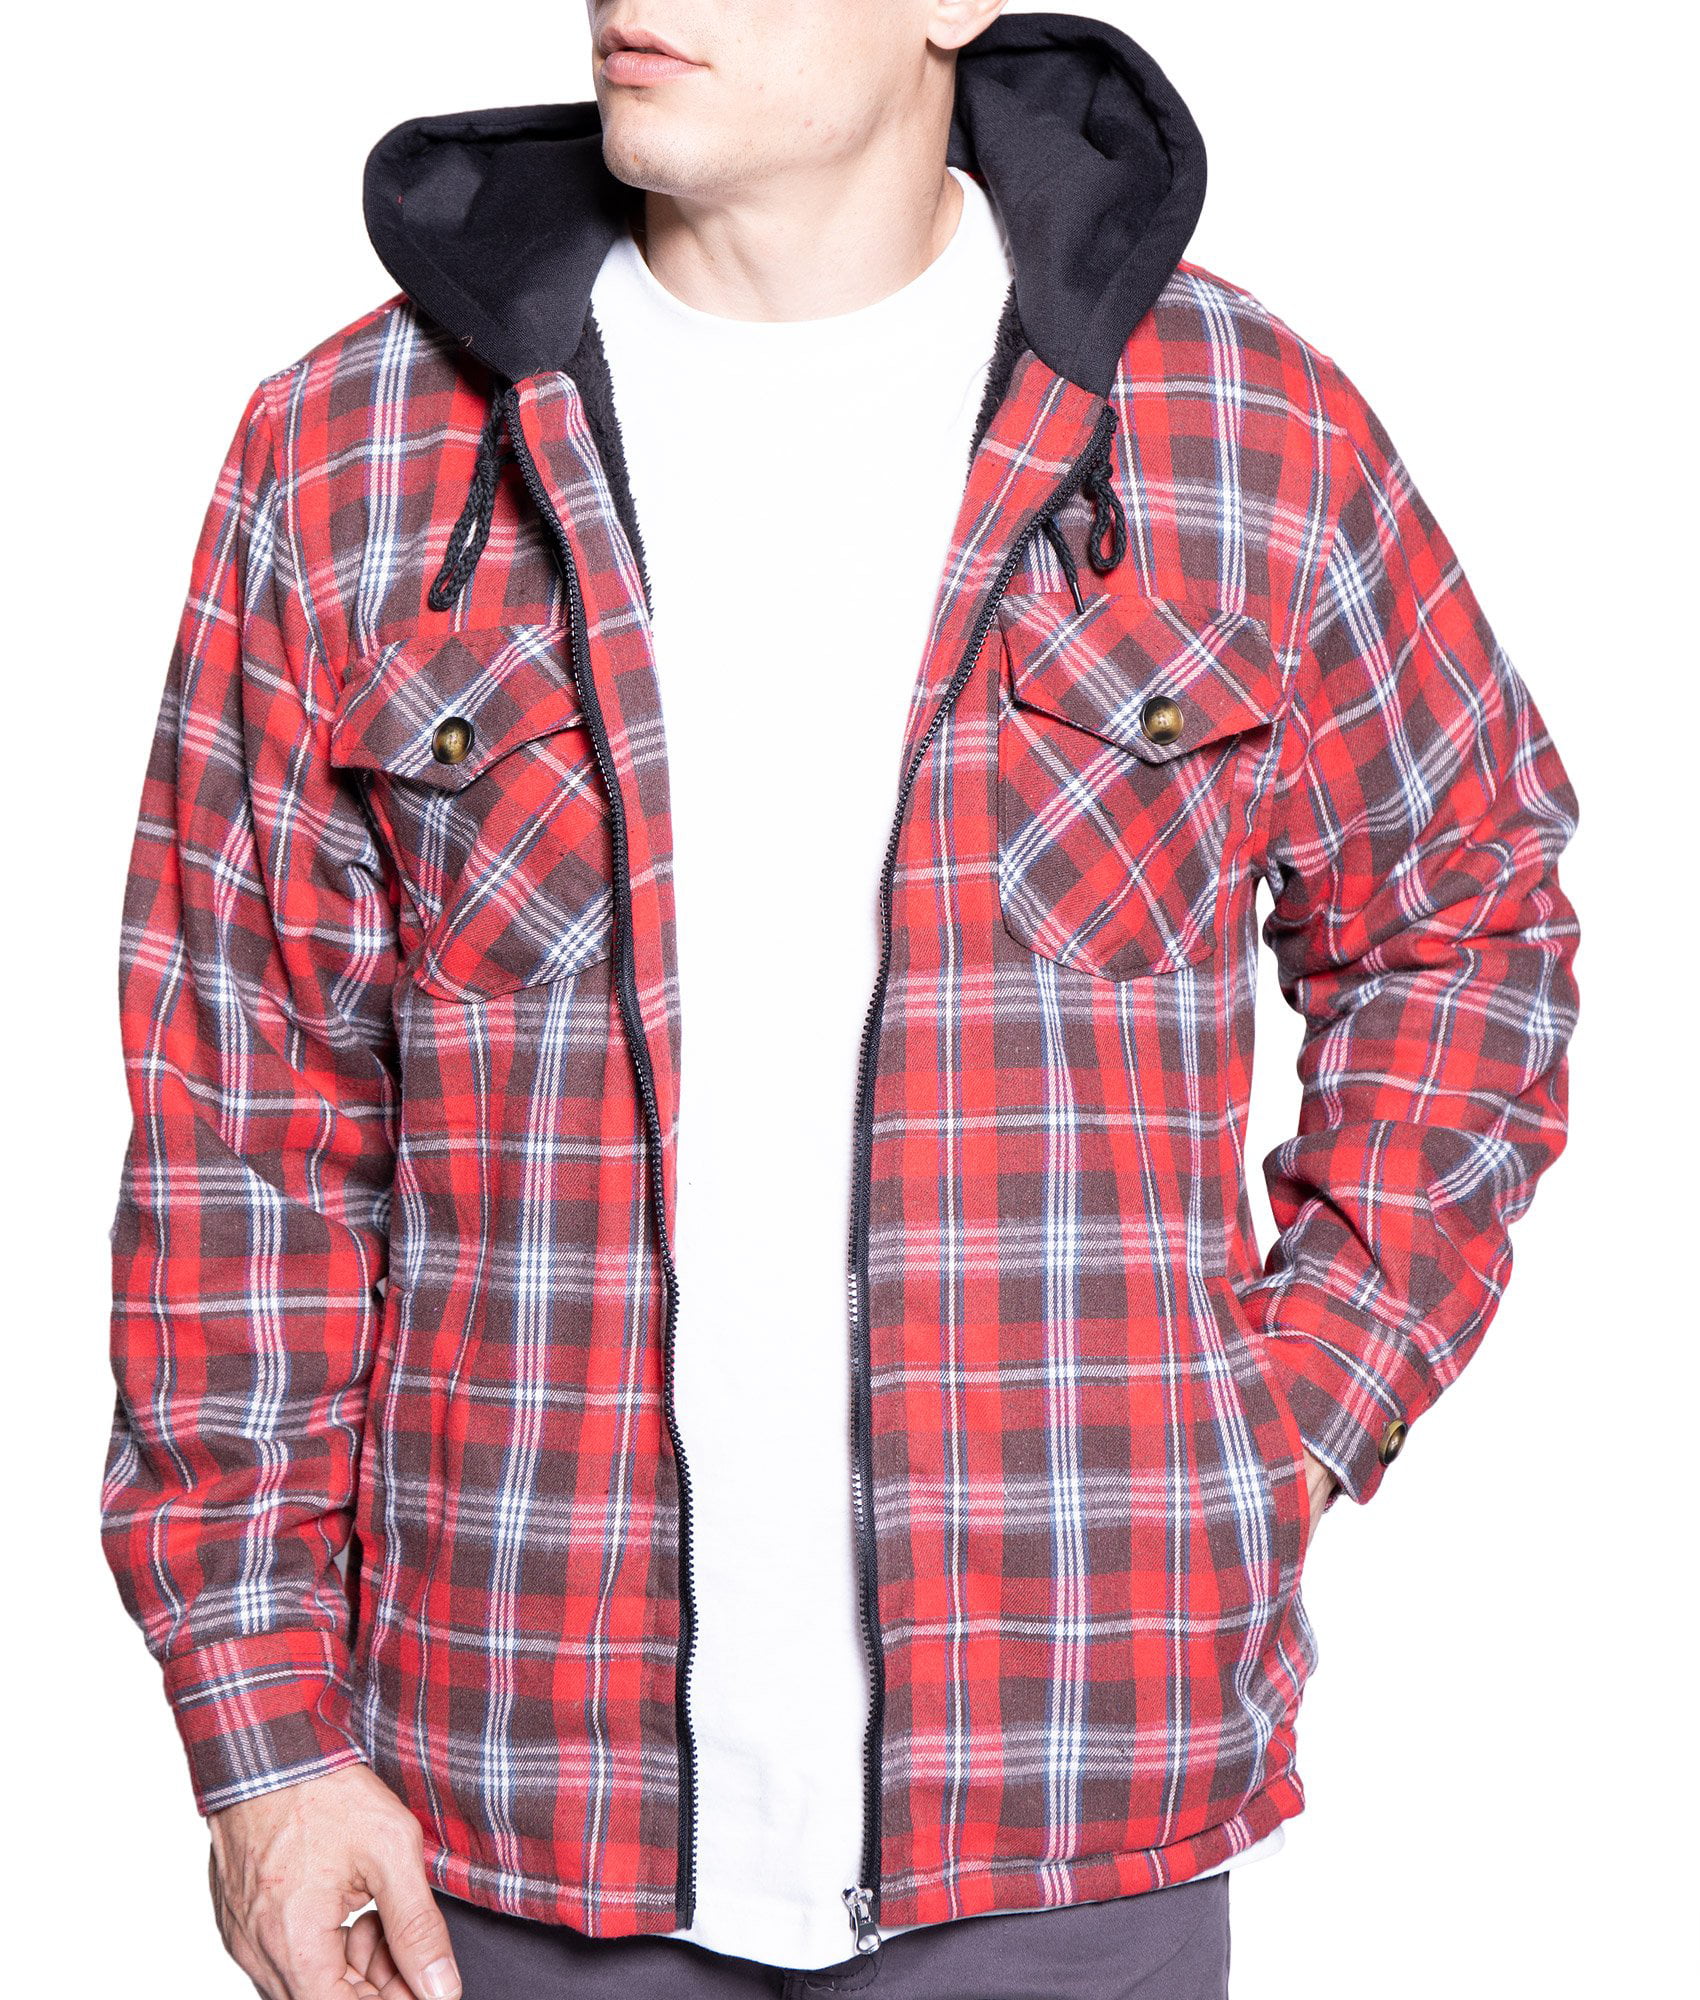 5XL Visive Mens Heavy Flannel Shirt Jacket for Mens Big and Tall Zip Up Fleece W/Hood Size M